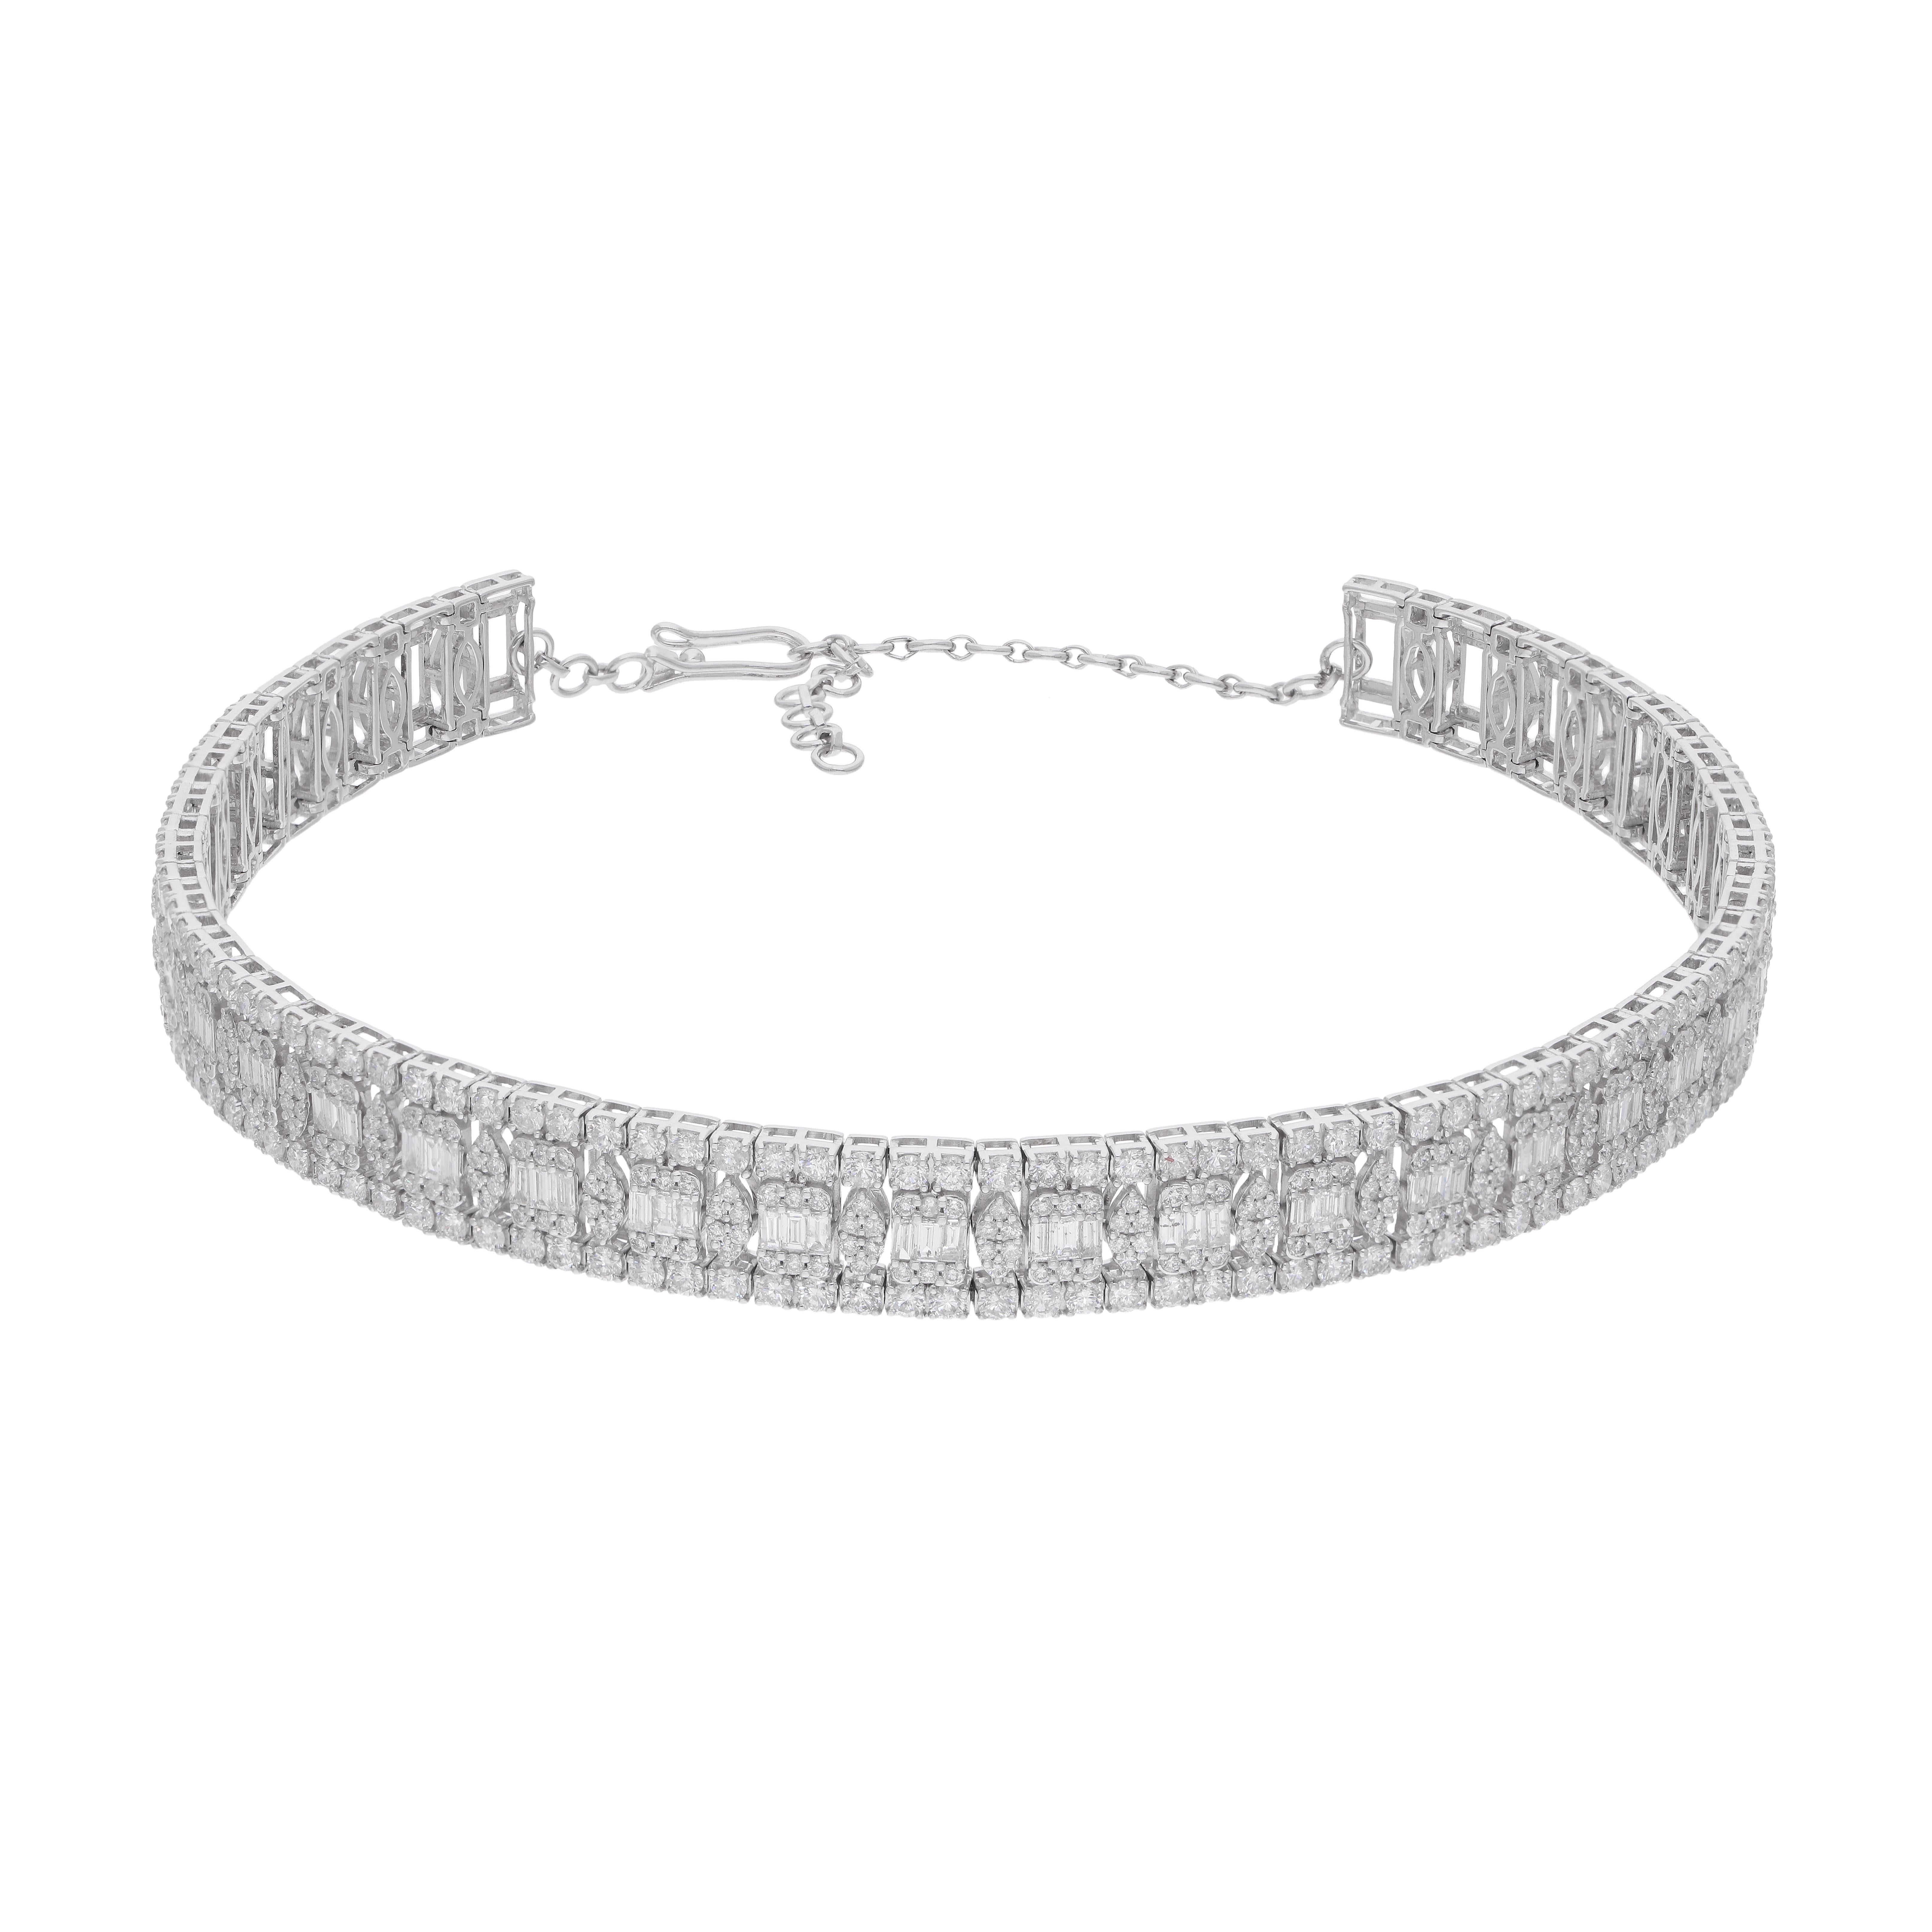 Elevate your jewelry collection with this extraordinary 13.35 Carat SI/HI Baguette Diamond Choker Necklace. It is a testament to exceptional craftsmanship, timeless design, and the allure of diamonds. Let its brilliance and elegance be the